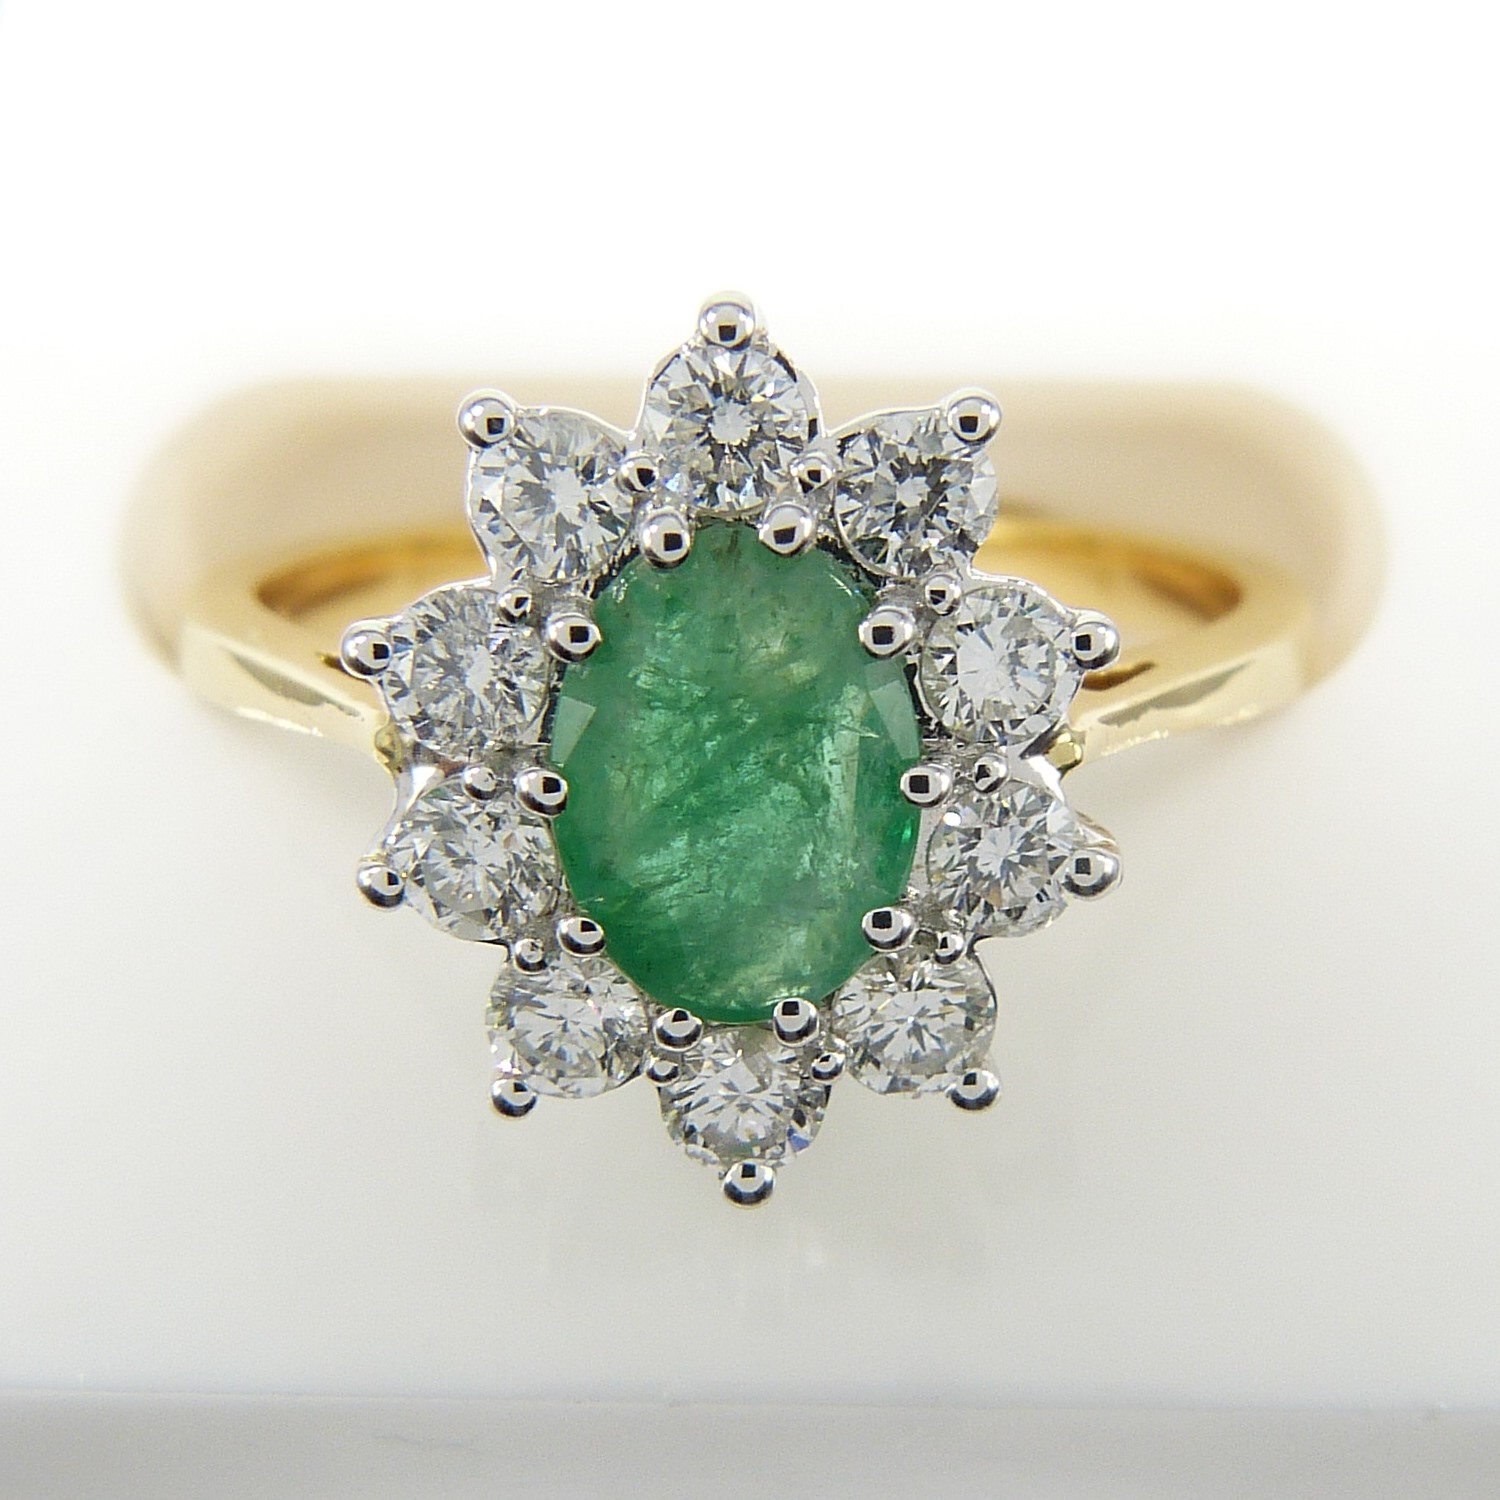 A certificated 18ct yellow Gold oval Emerald gemstone and round brilliant-cut Diamond ring